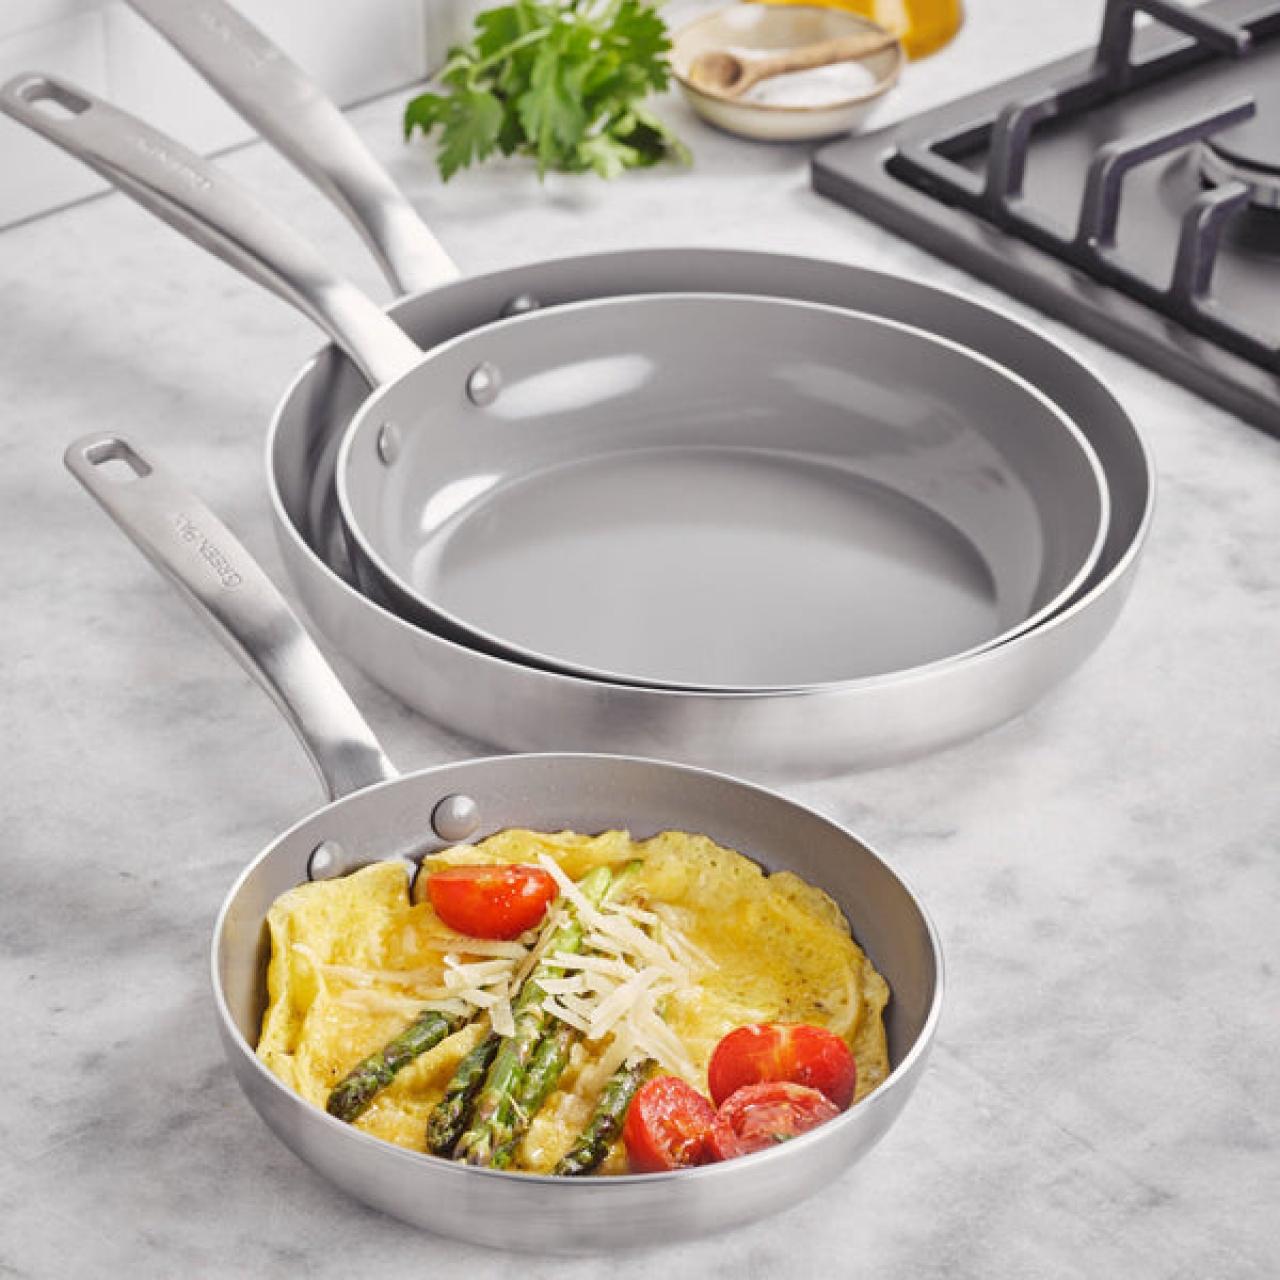 These Are the Best Post-Cyber Monday Cookware Deals